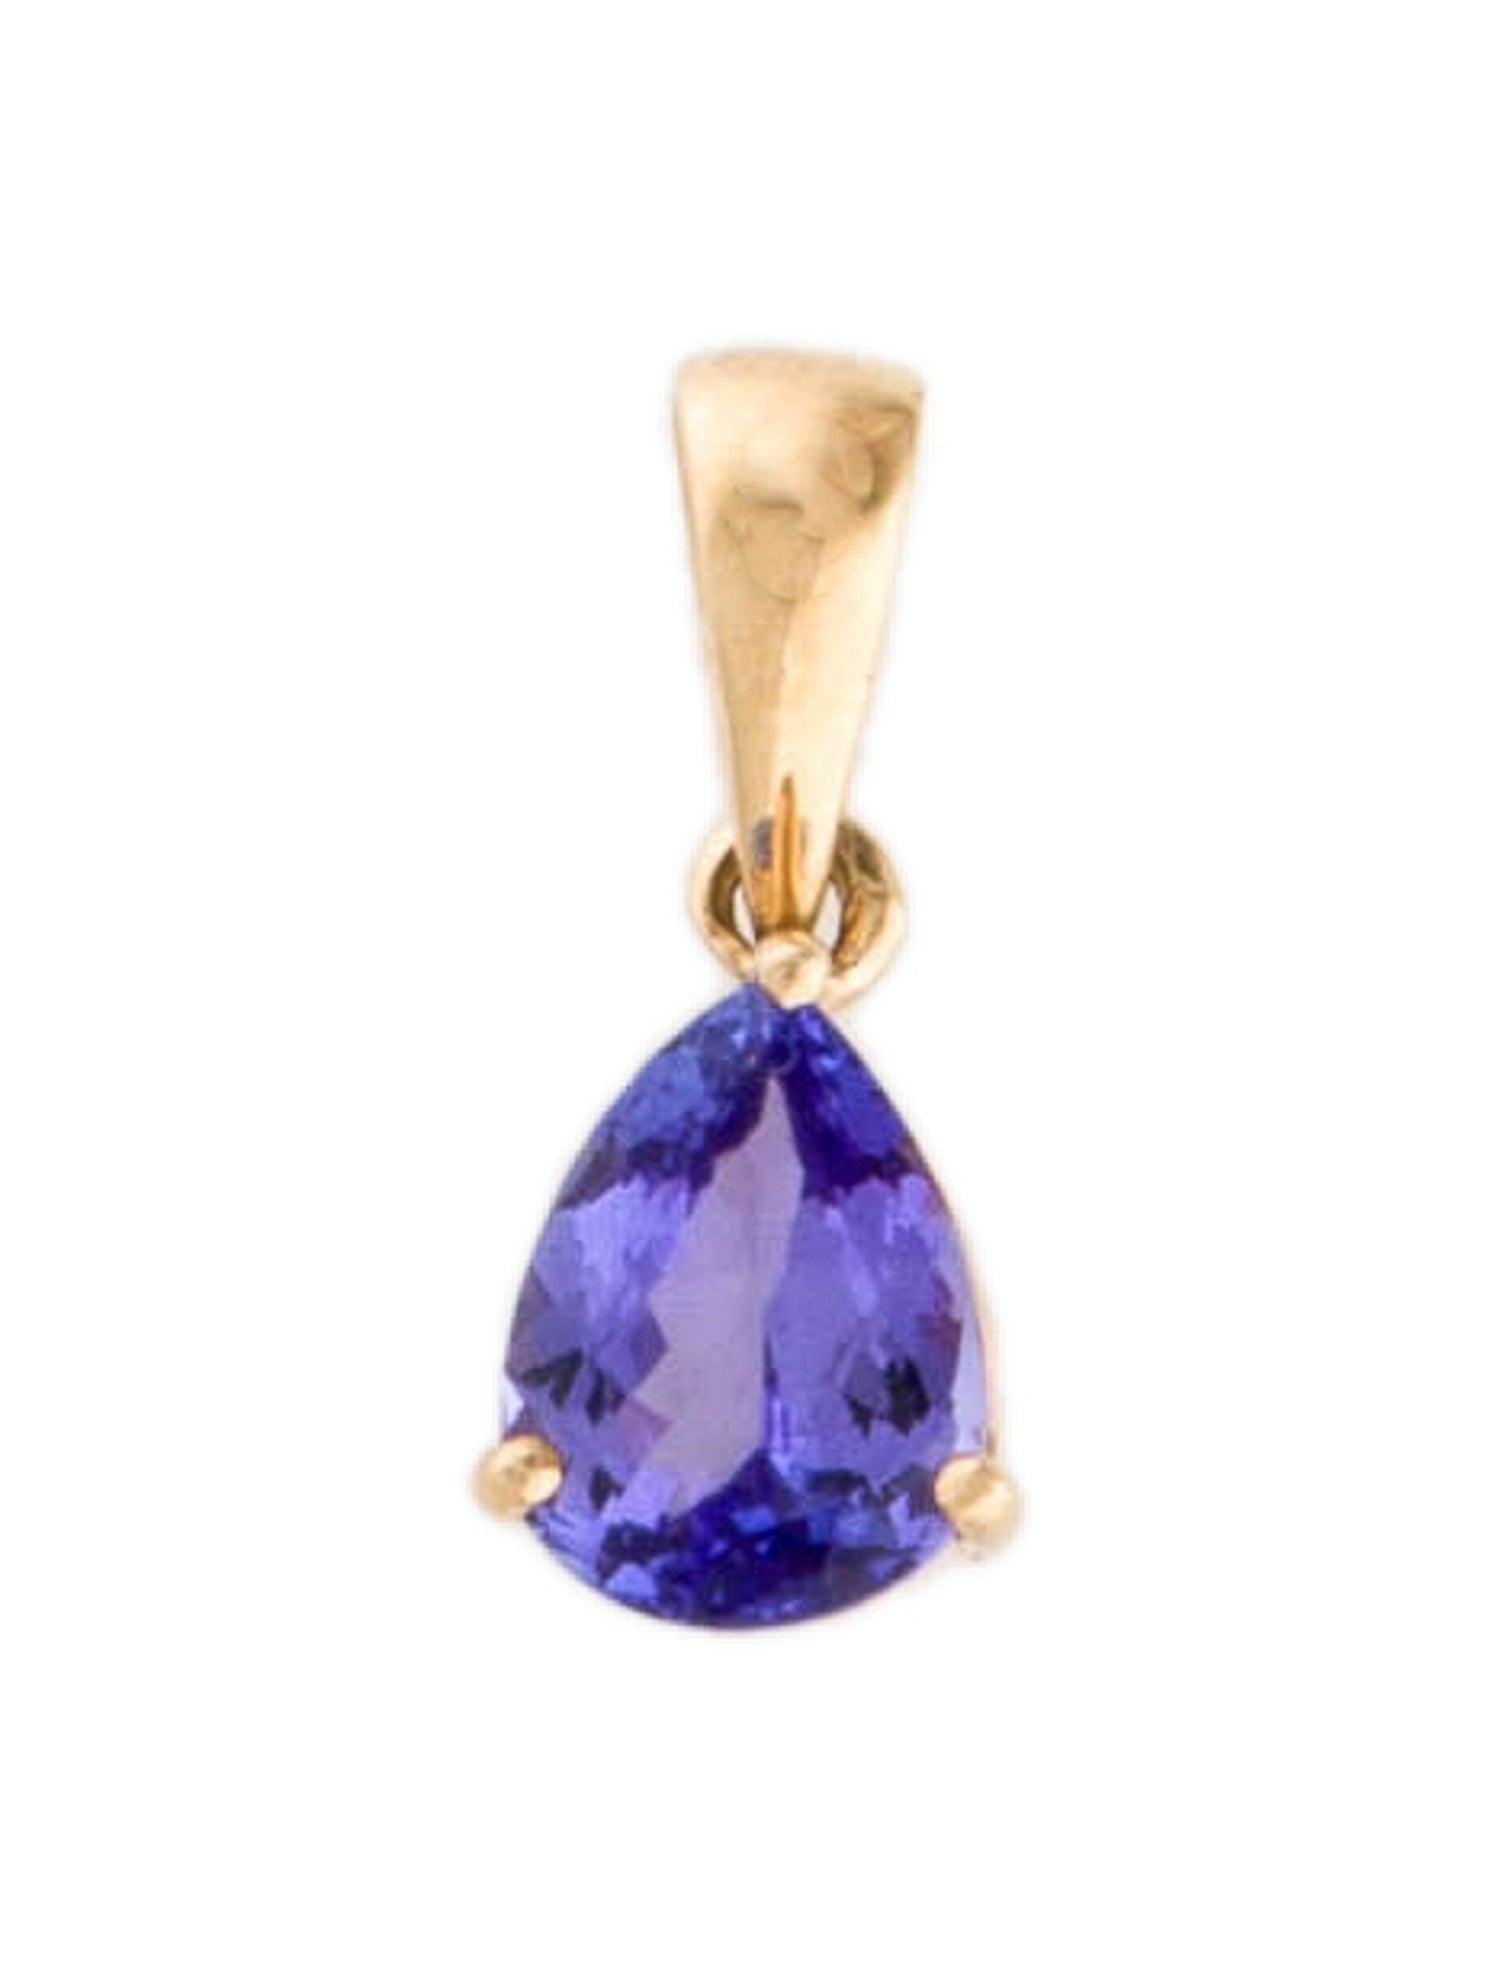 Introducing our exquisite 18K Yellow Gold Tanzanite Pendant, a symbol of sophistication and timeless beauty. This pendant features a stunning Pear Modified Brilliant Tanzanite, renowned for its captivating deep purple hue and slight inclusions that